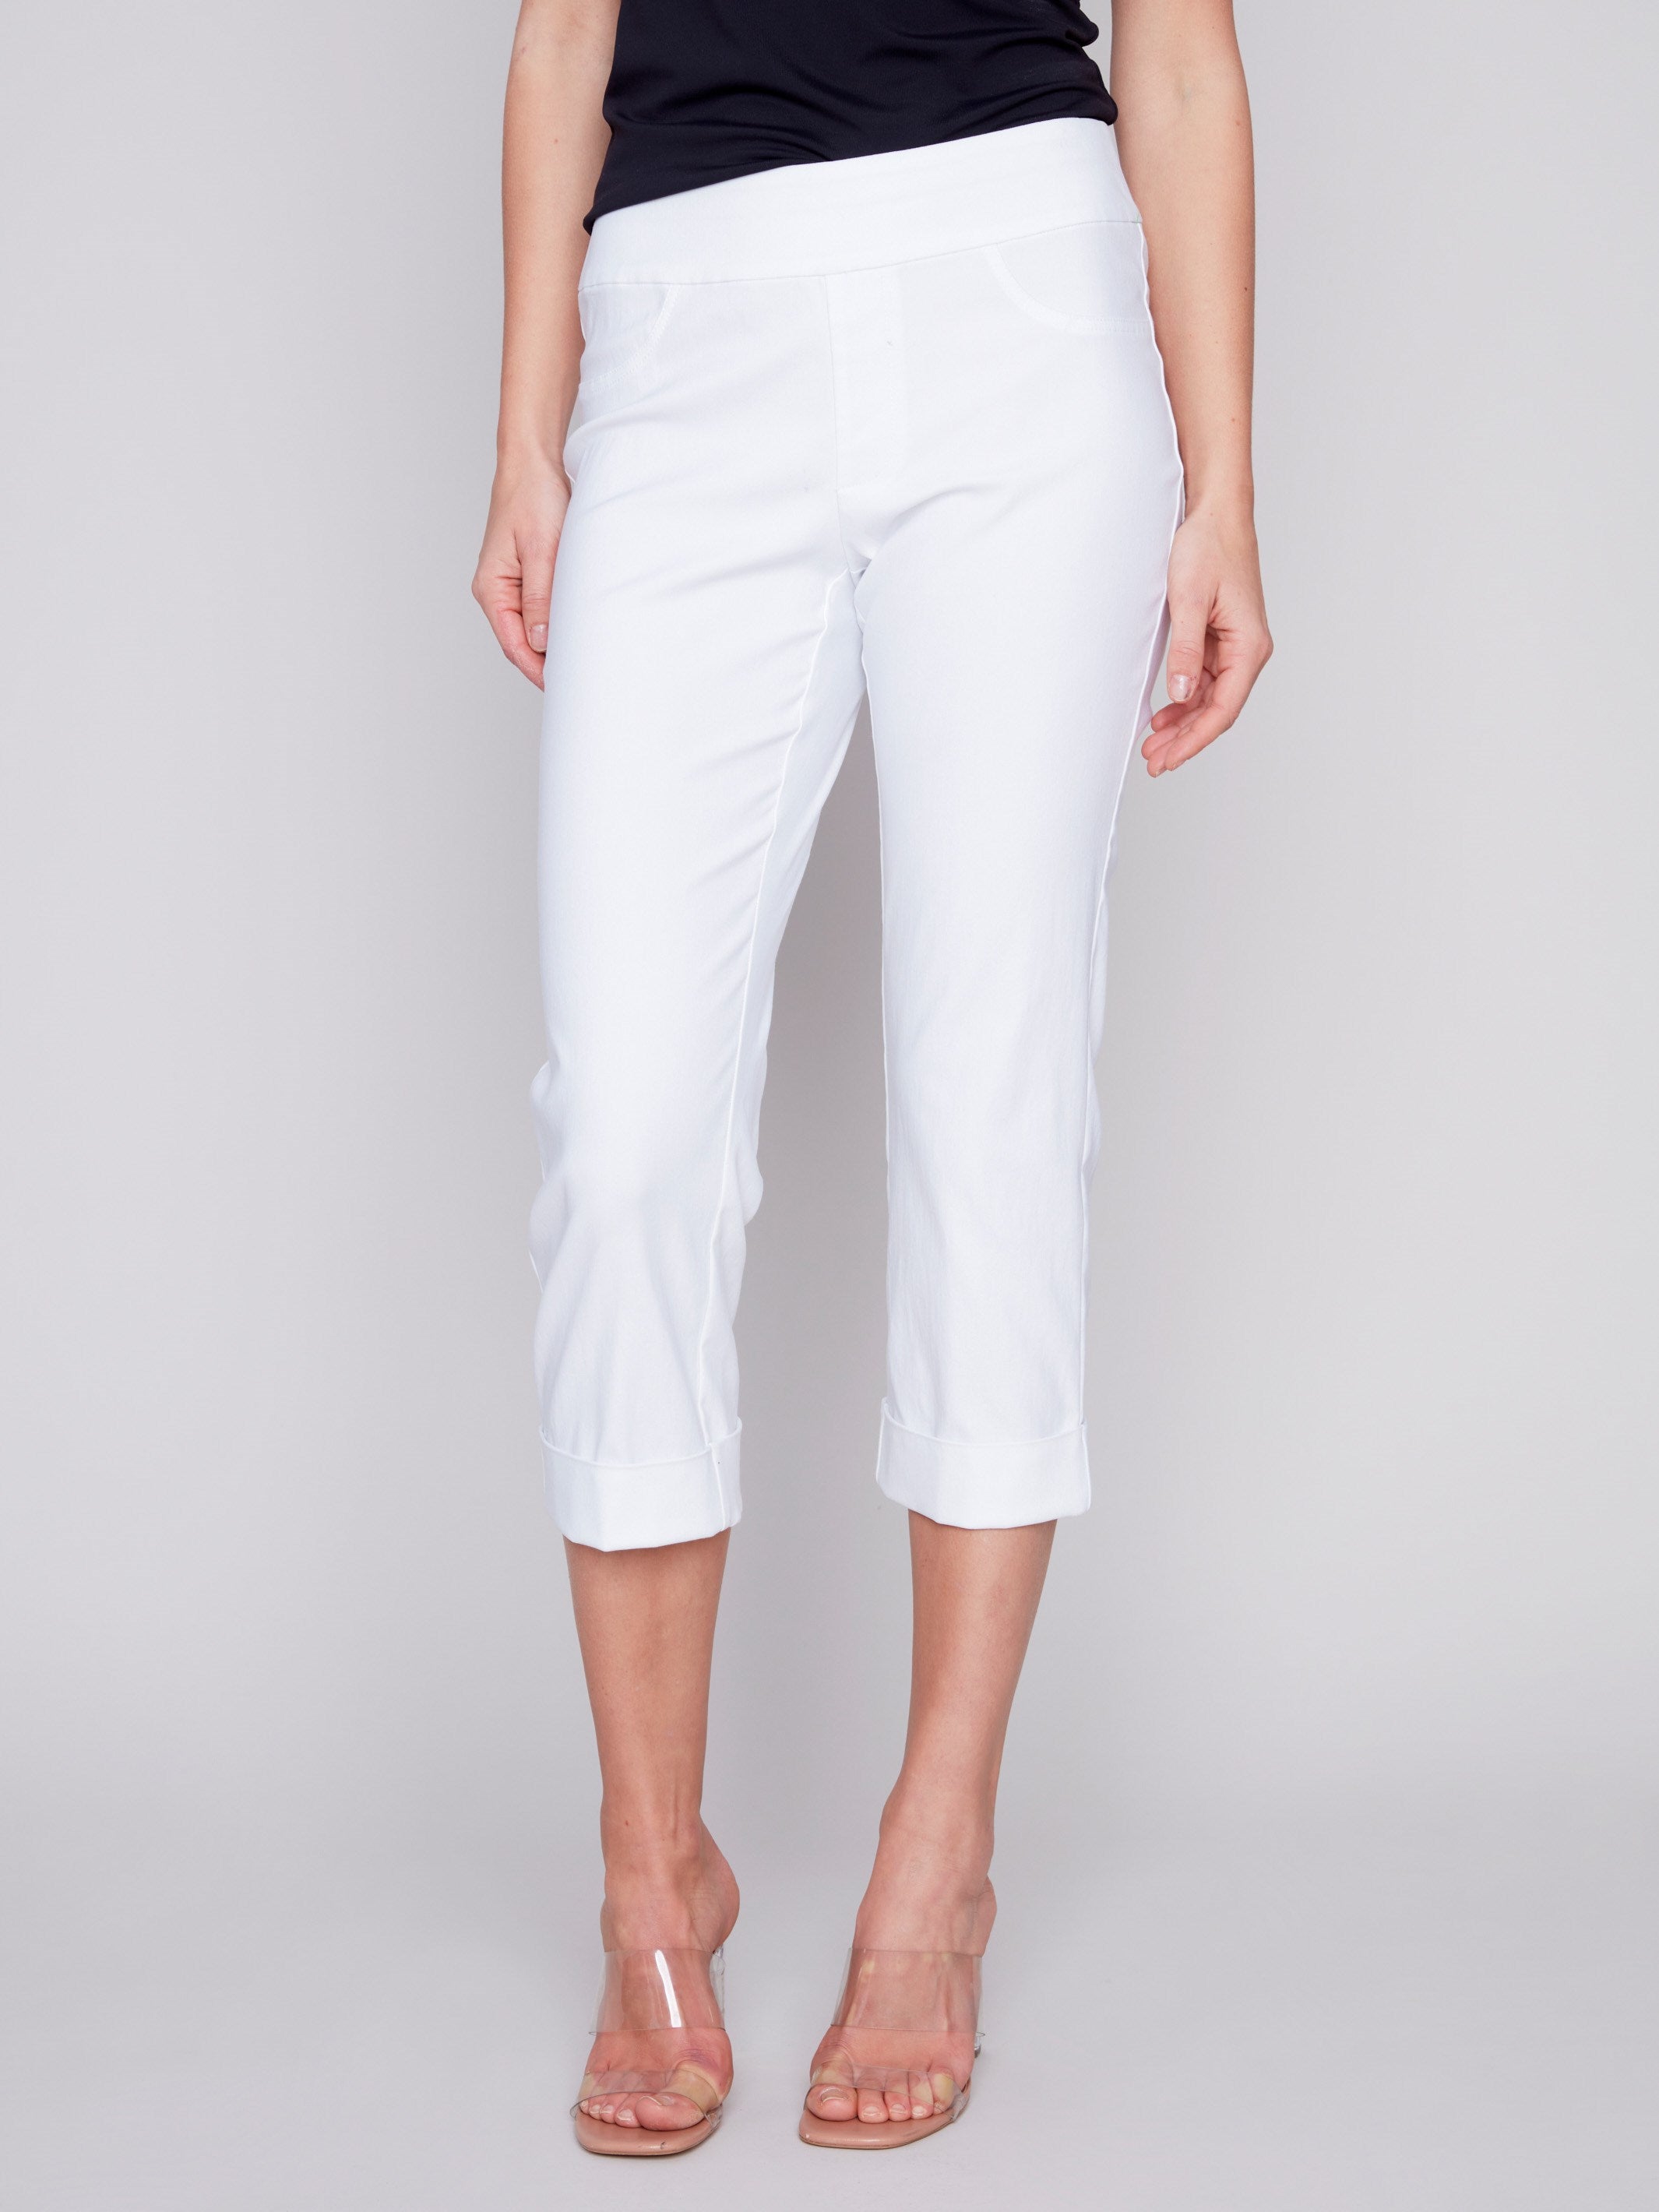 Stretch Pull-On Capri Pants - White - Charlie B Collection Canada - Image 2